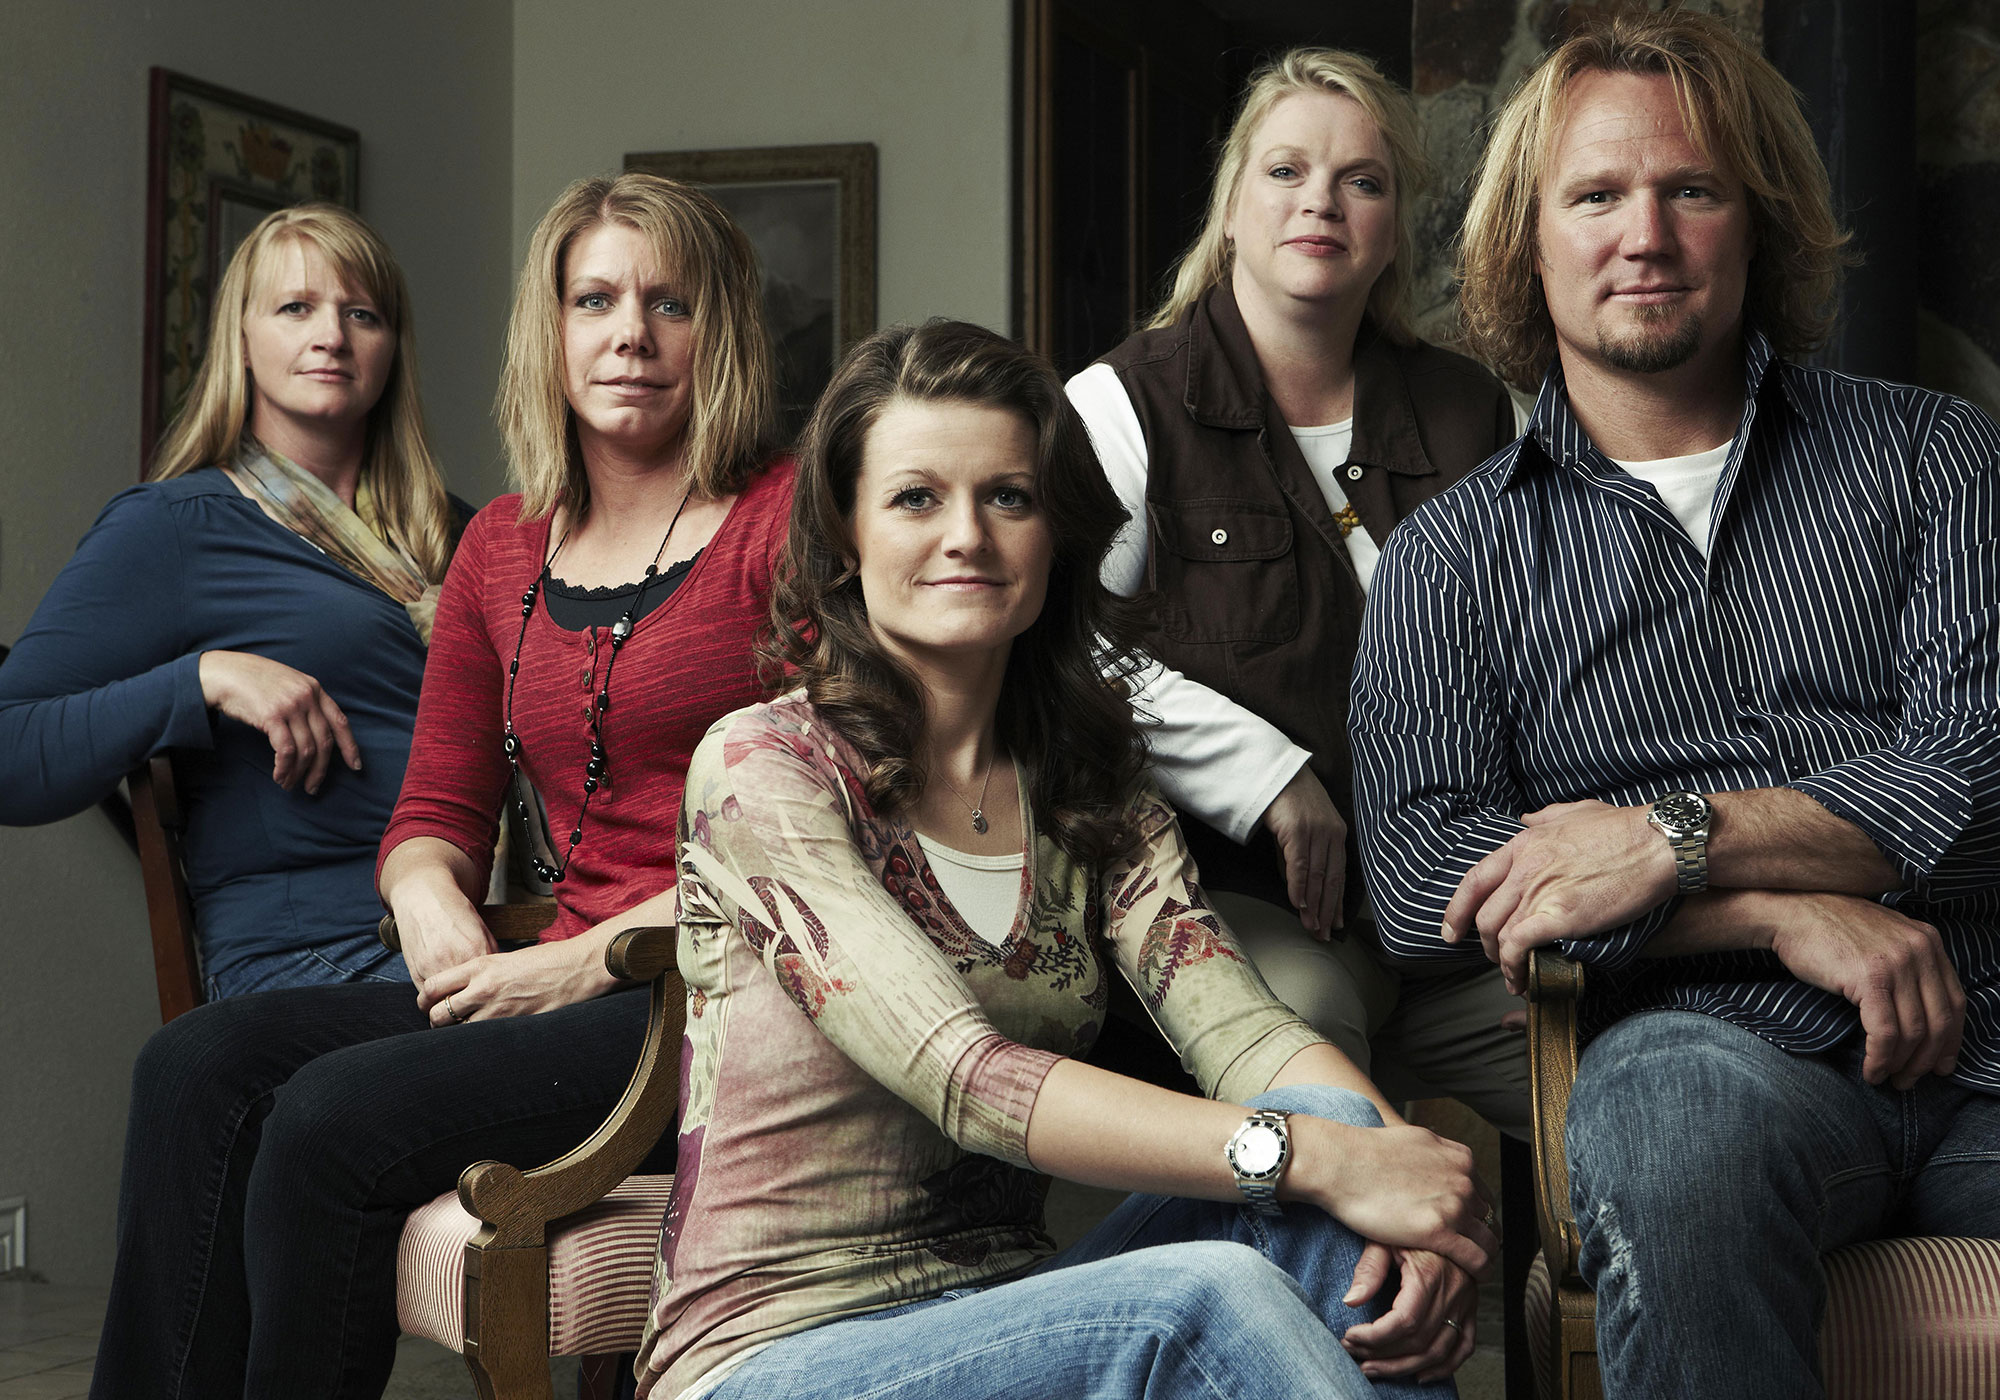 Sister Wives Tell-All Kody Brown, Meri Discuss Sex, Cheating, More image pic picture